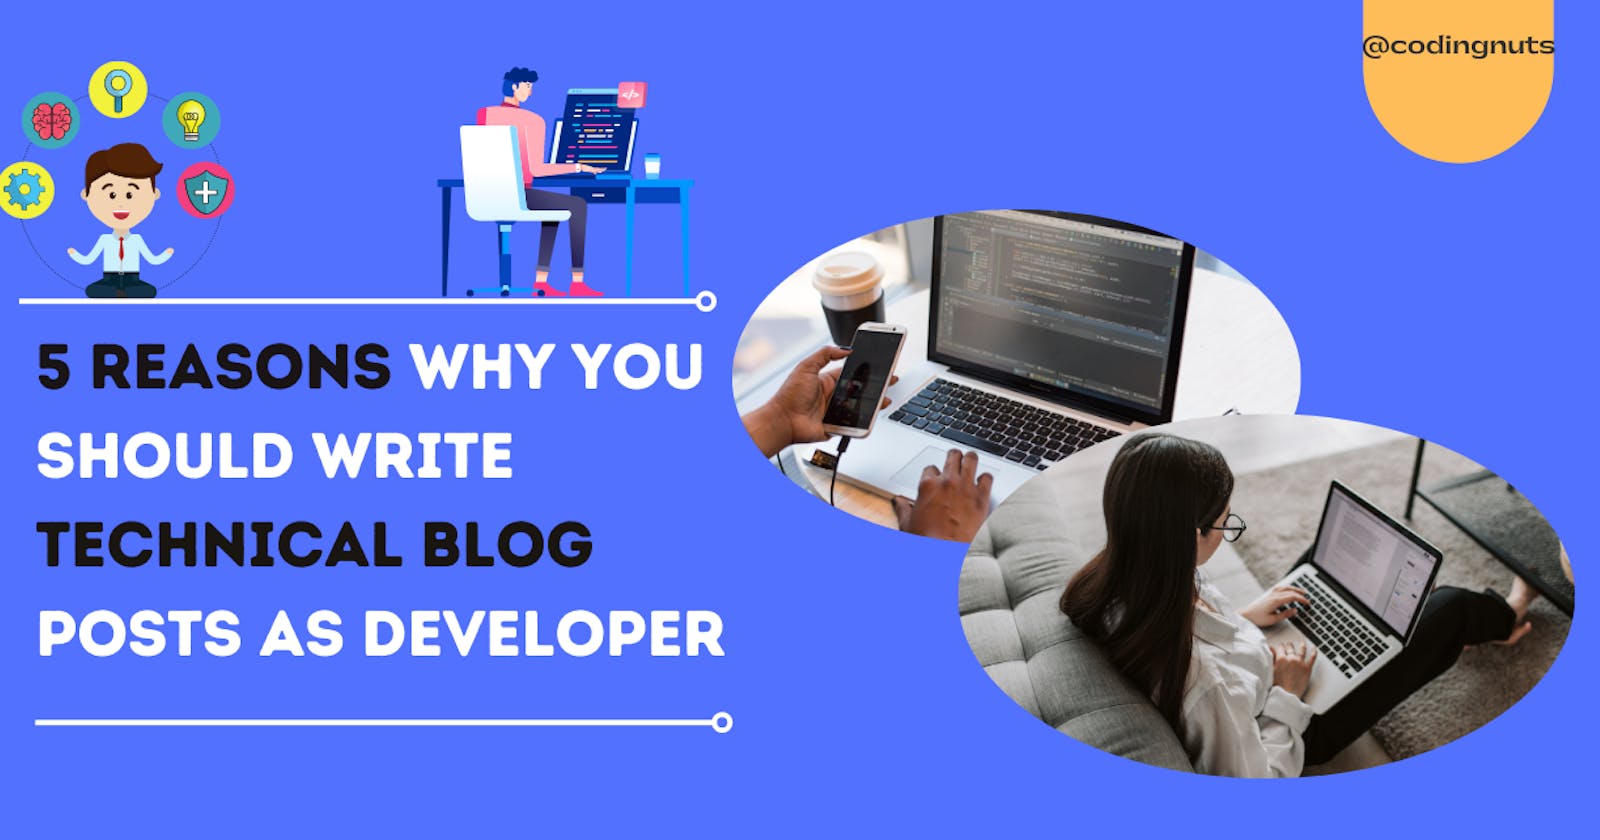 5 Reasons Why You Should Write Technical Blog Posts as Developer